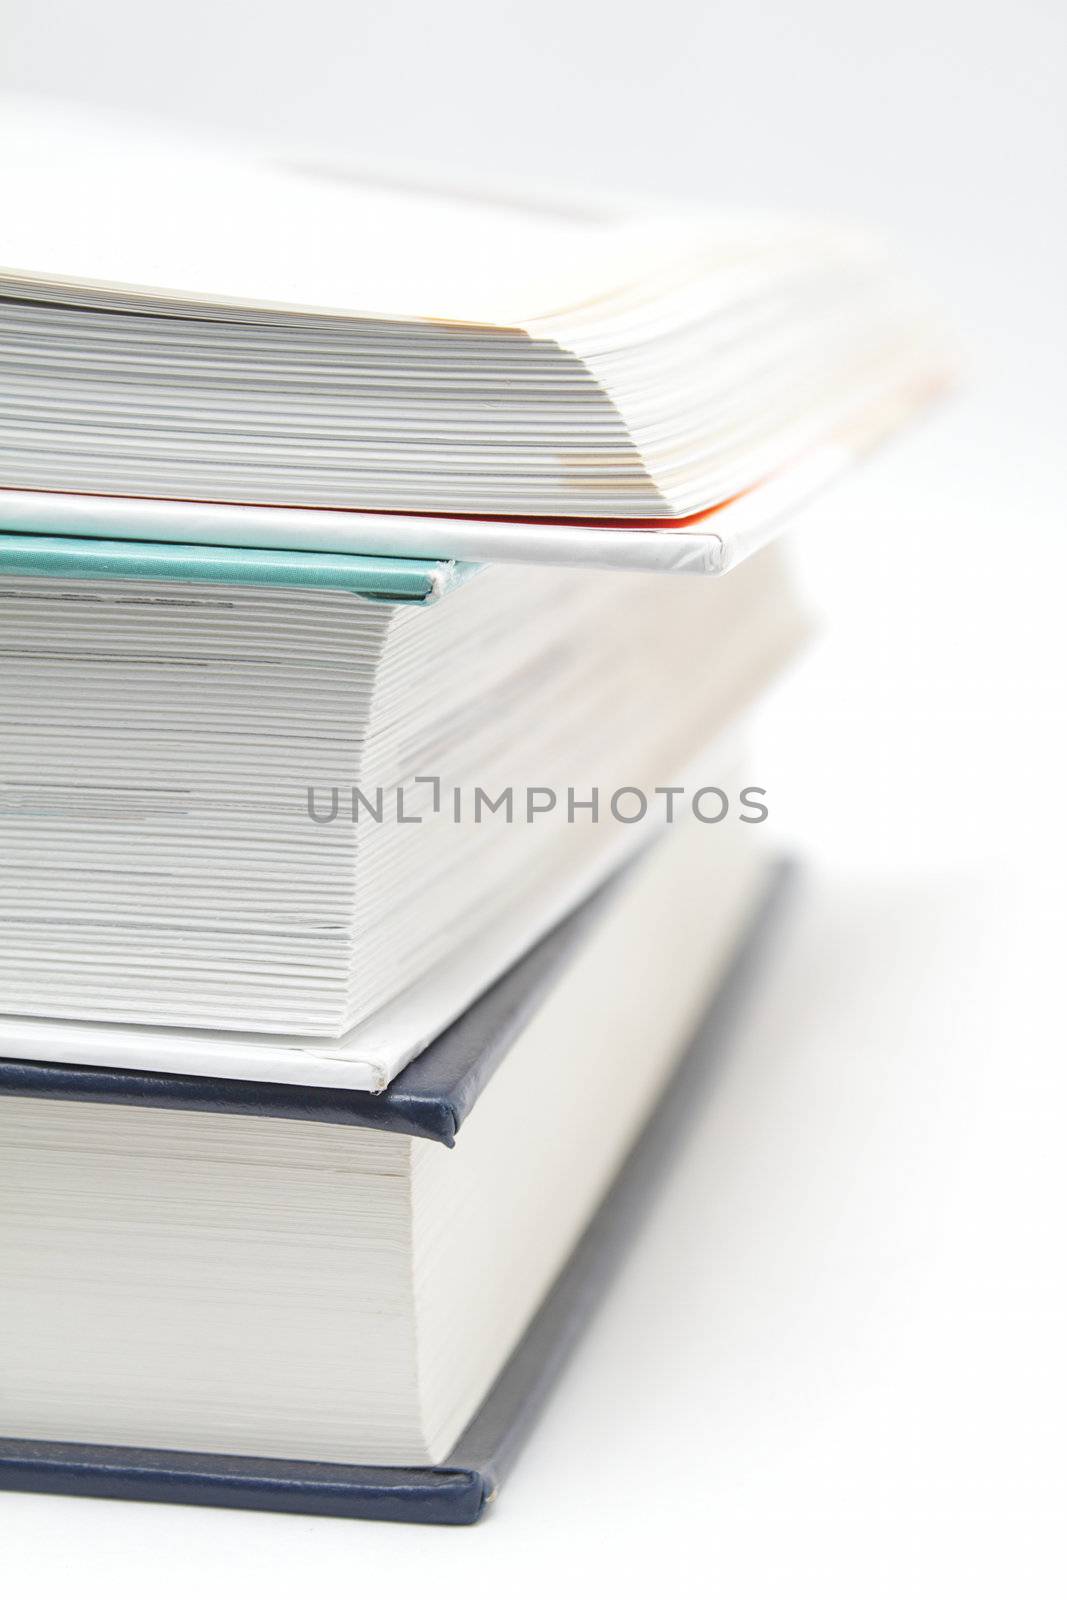 Stack of three books by pulen